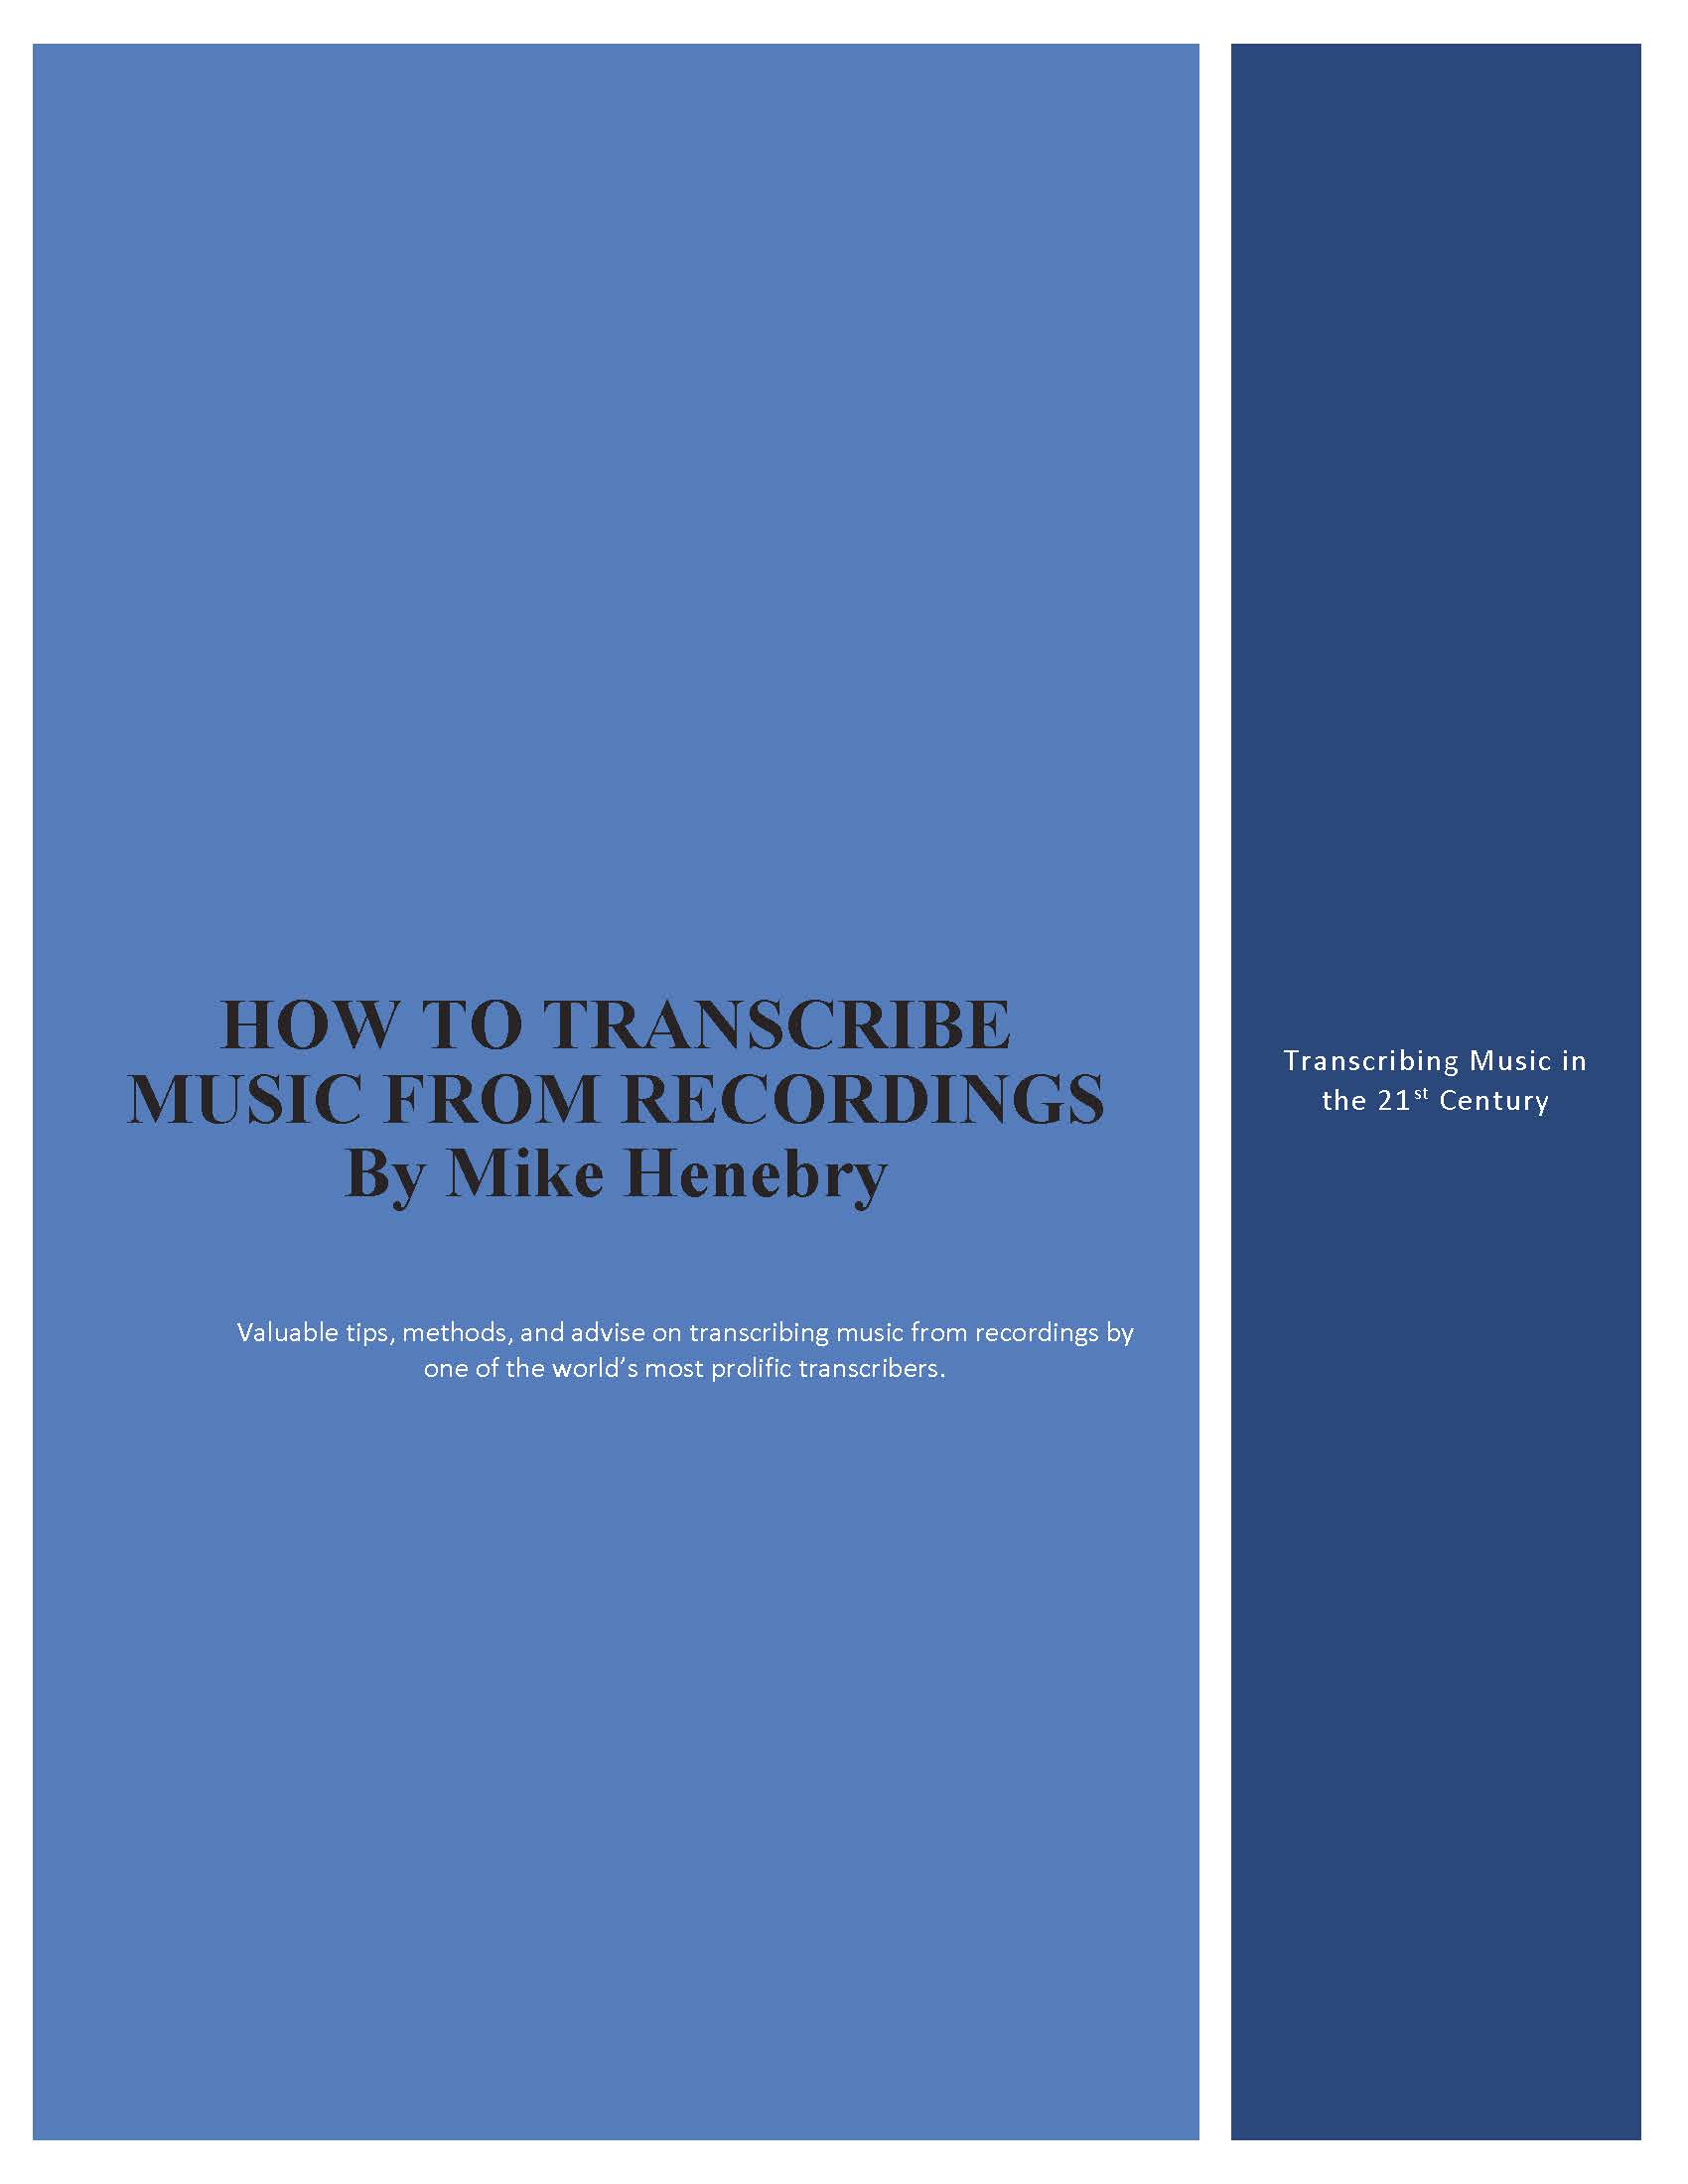 How to Transcribe Music